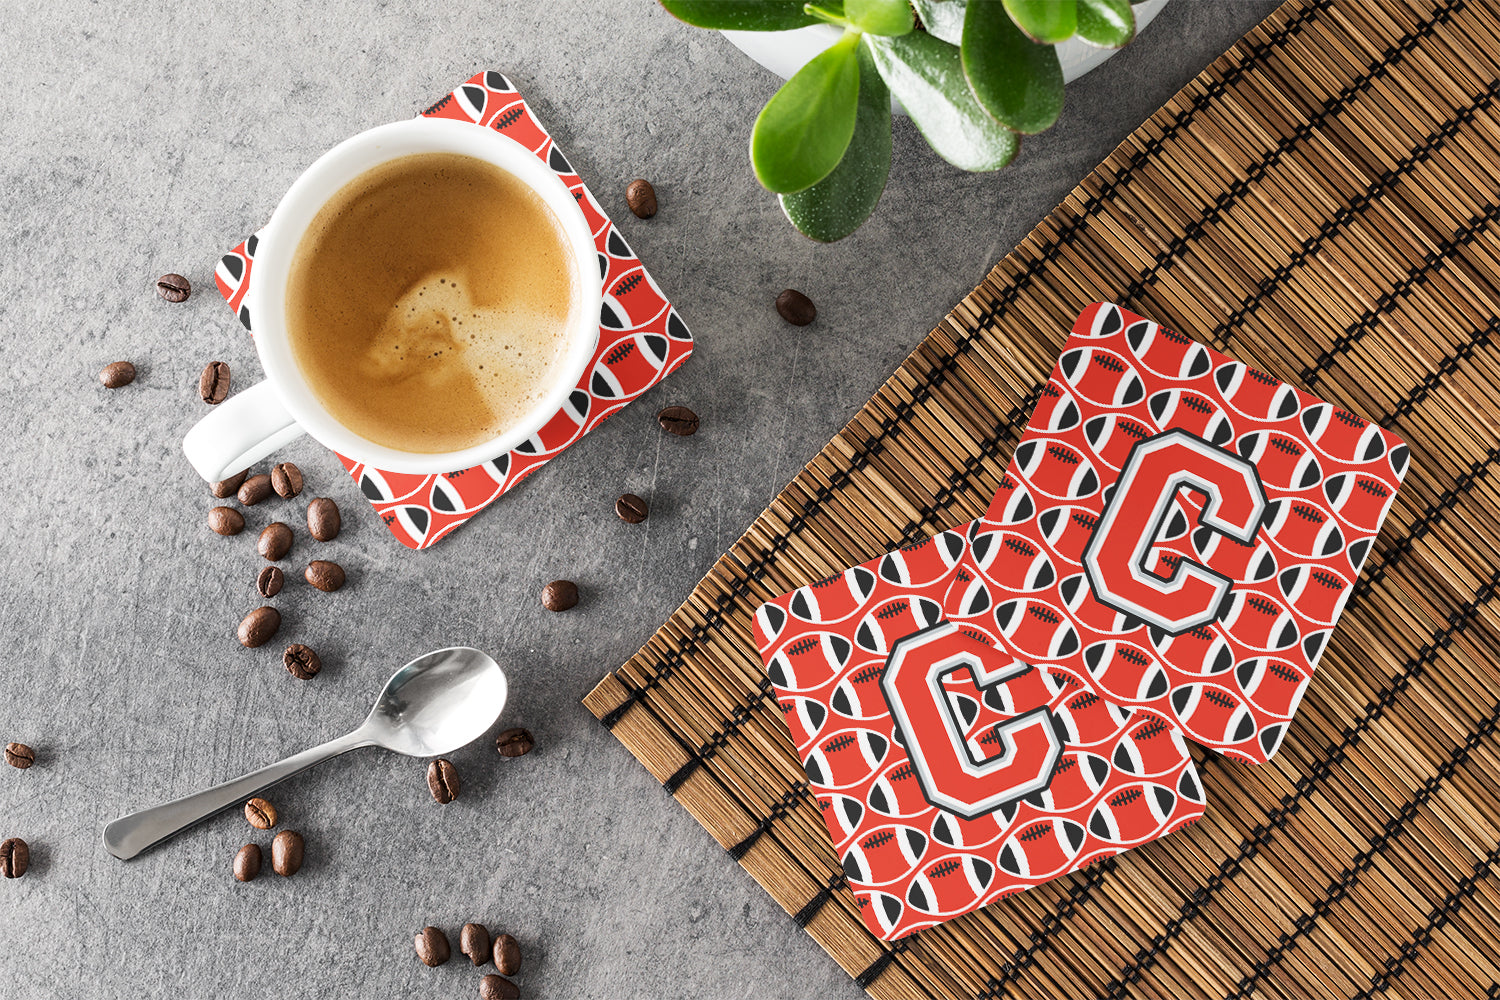 Letter C Football Scarlet and Grey Foam Coaster Set of 4 CJ1067-CFC - the-store.com